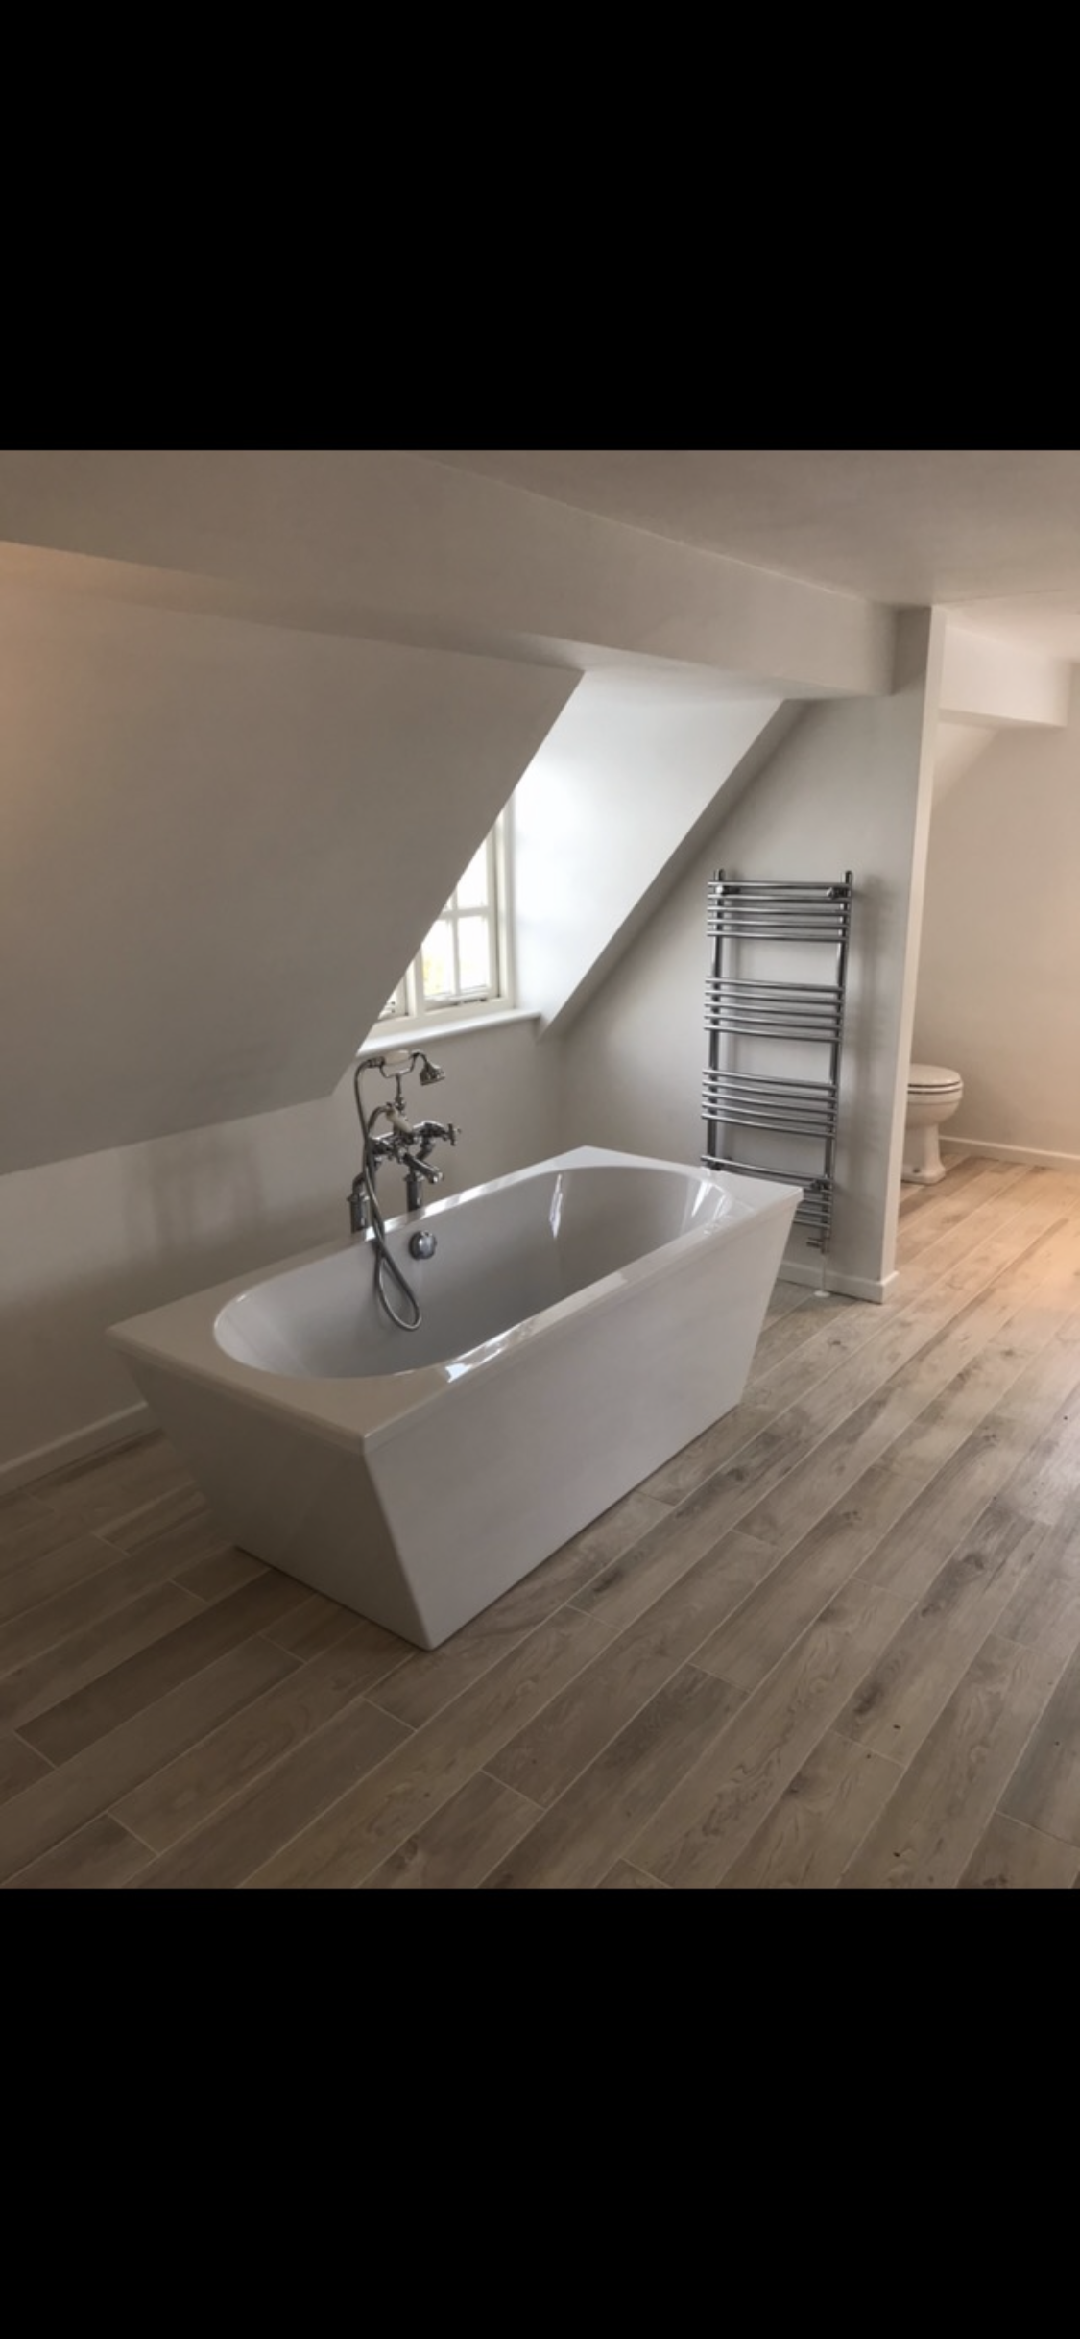 Master ensuite fitted by Cotswold Vale with luxury free standing bath